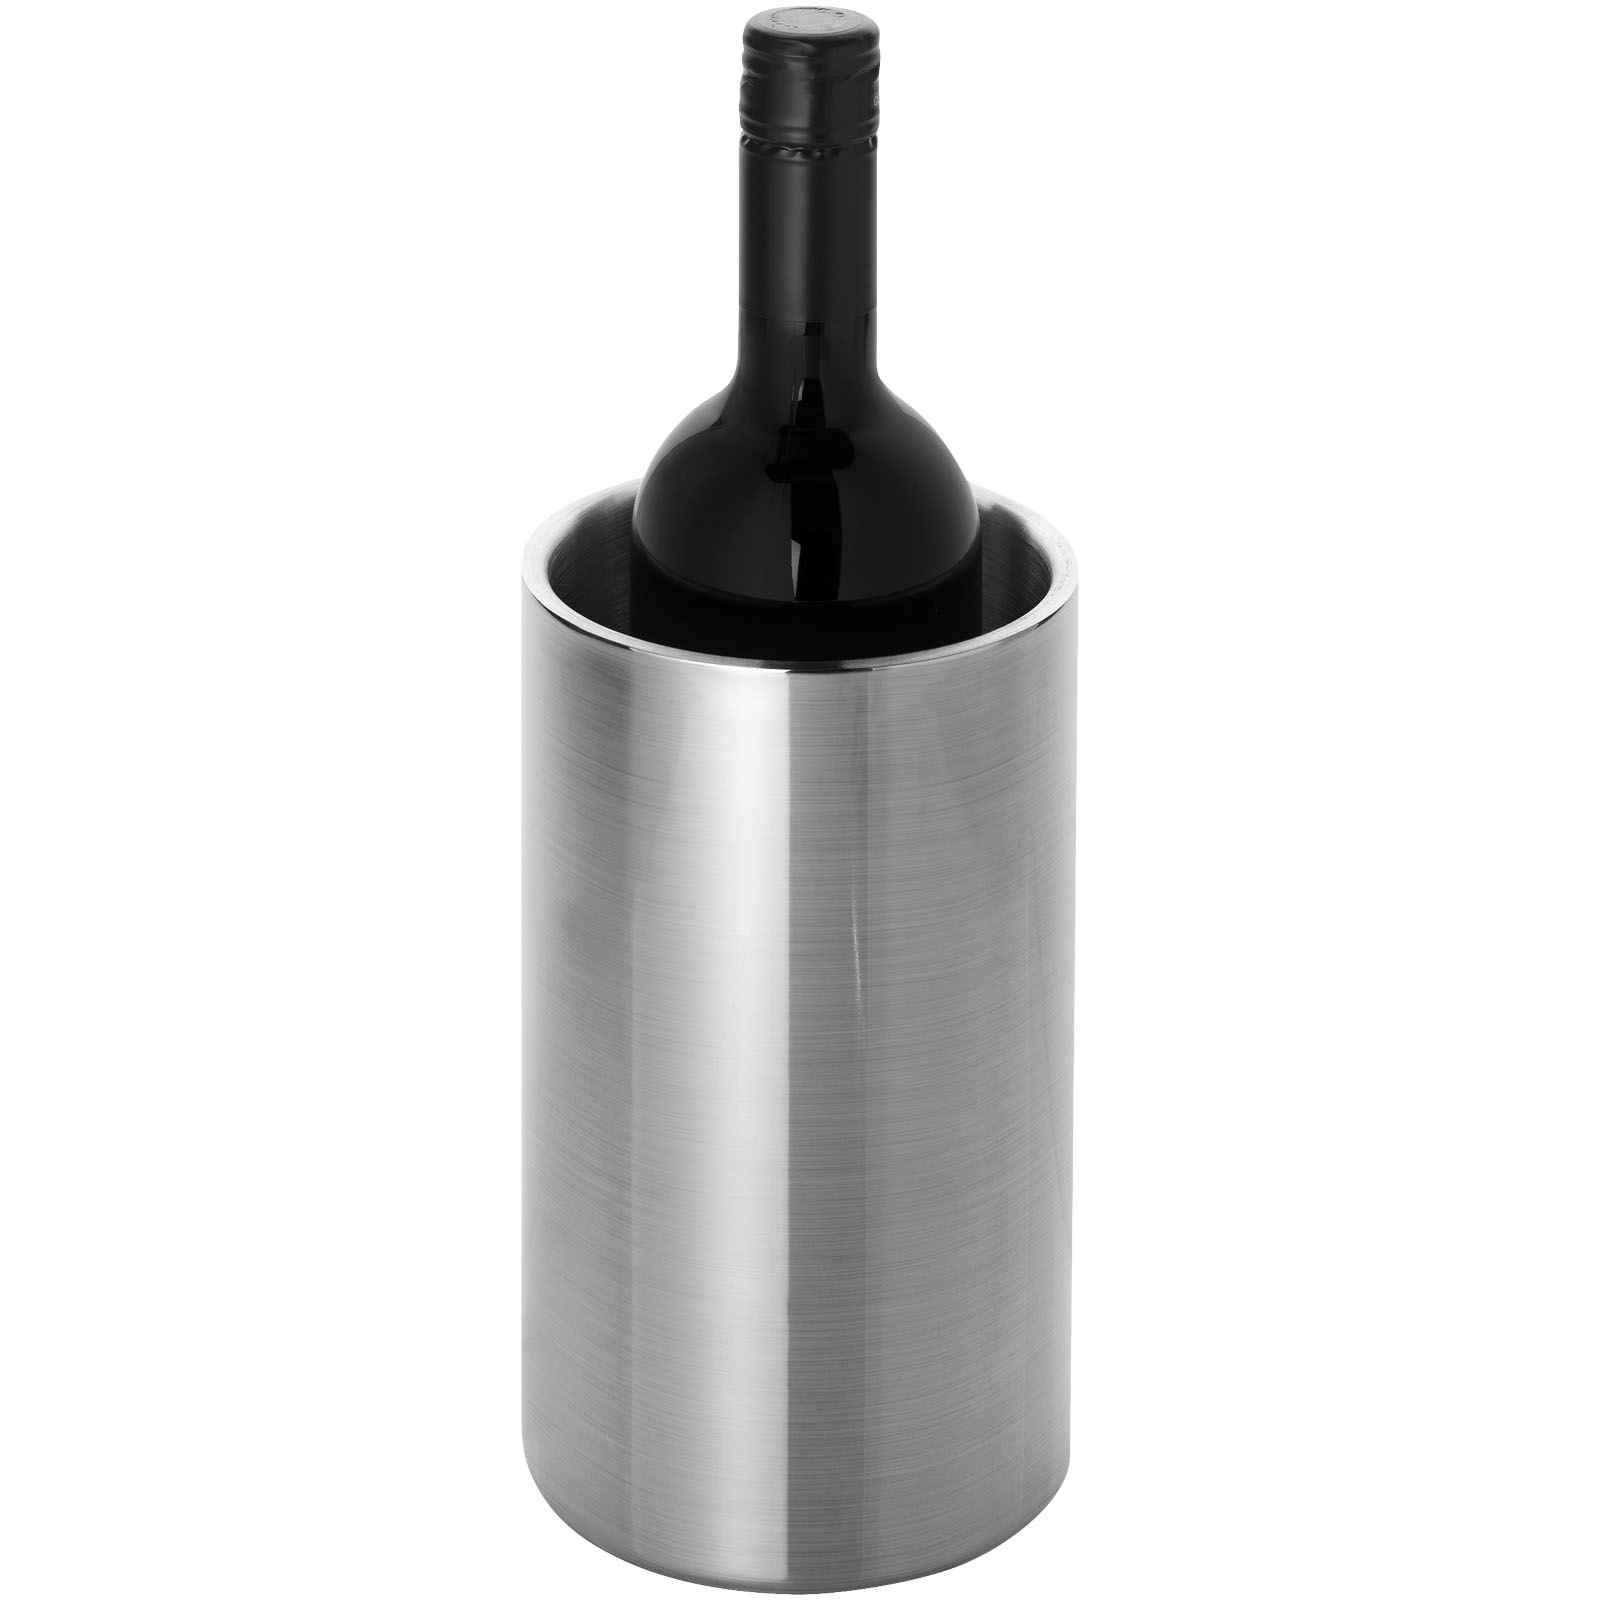 Advertising Wine Accessories - Cielo double-walled stainless steel wine cooler